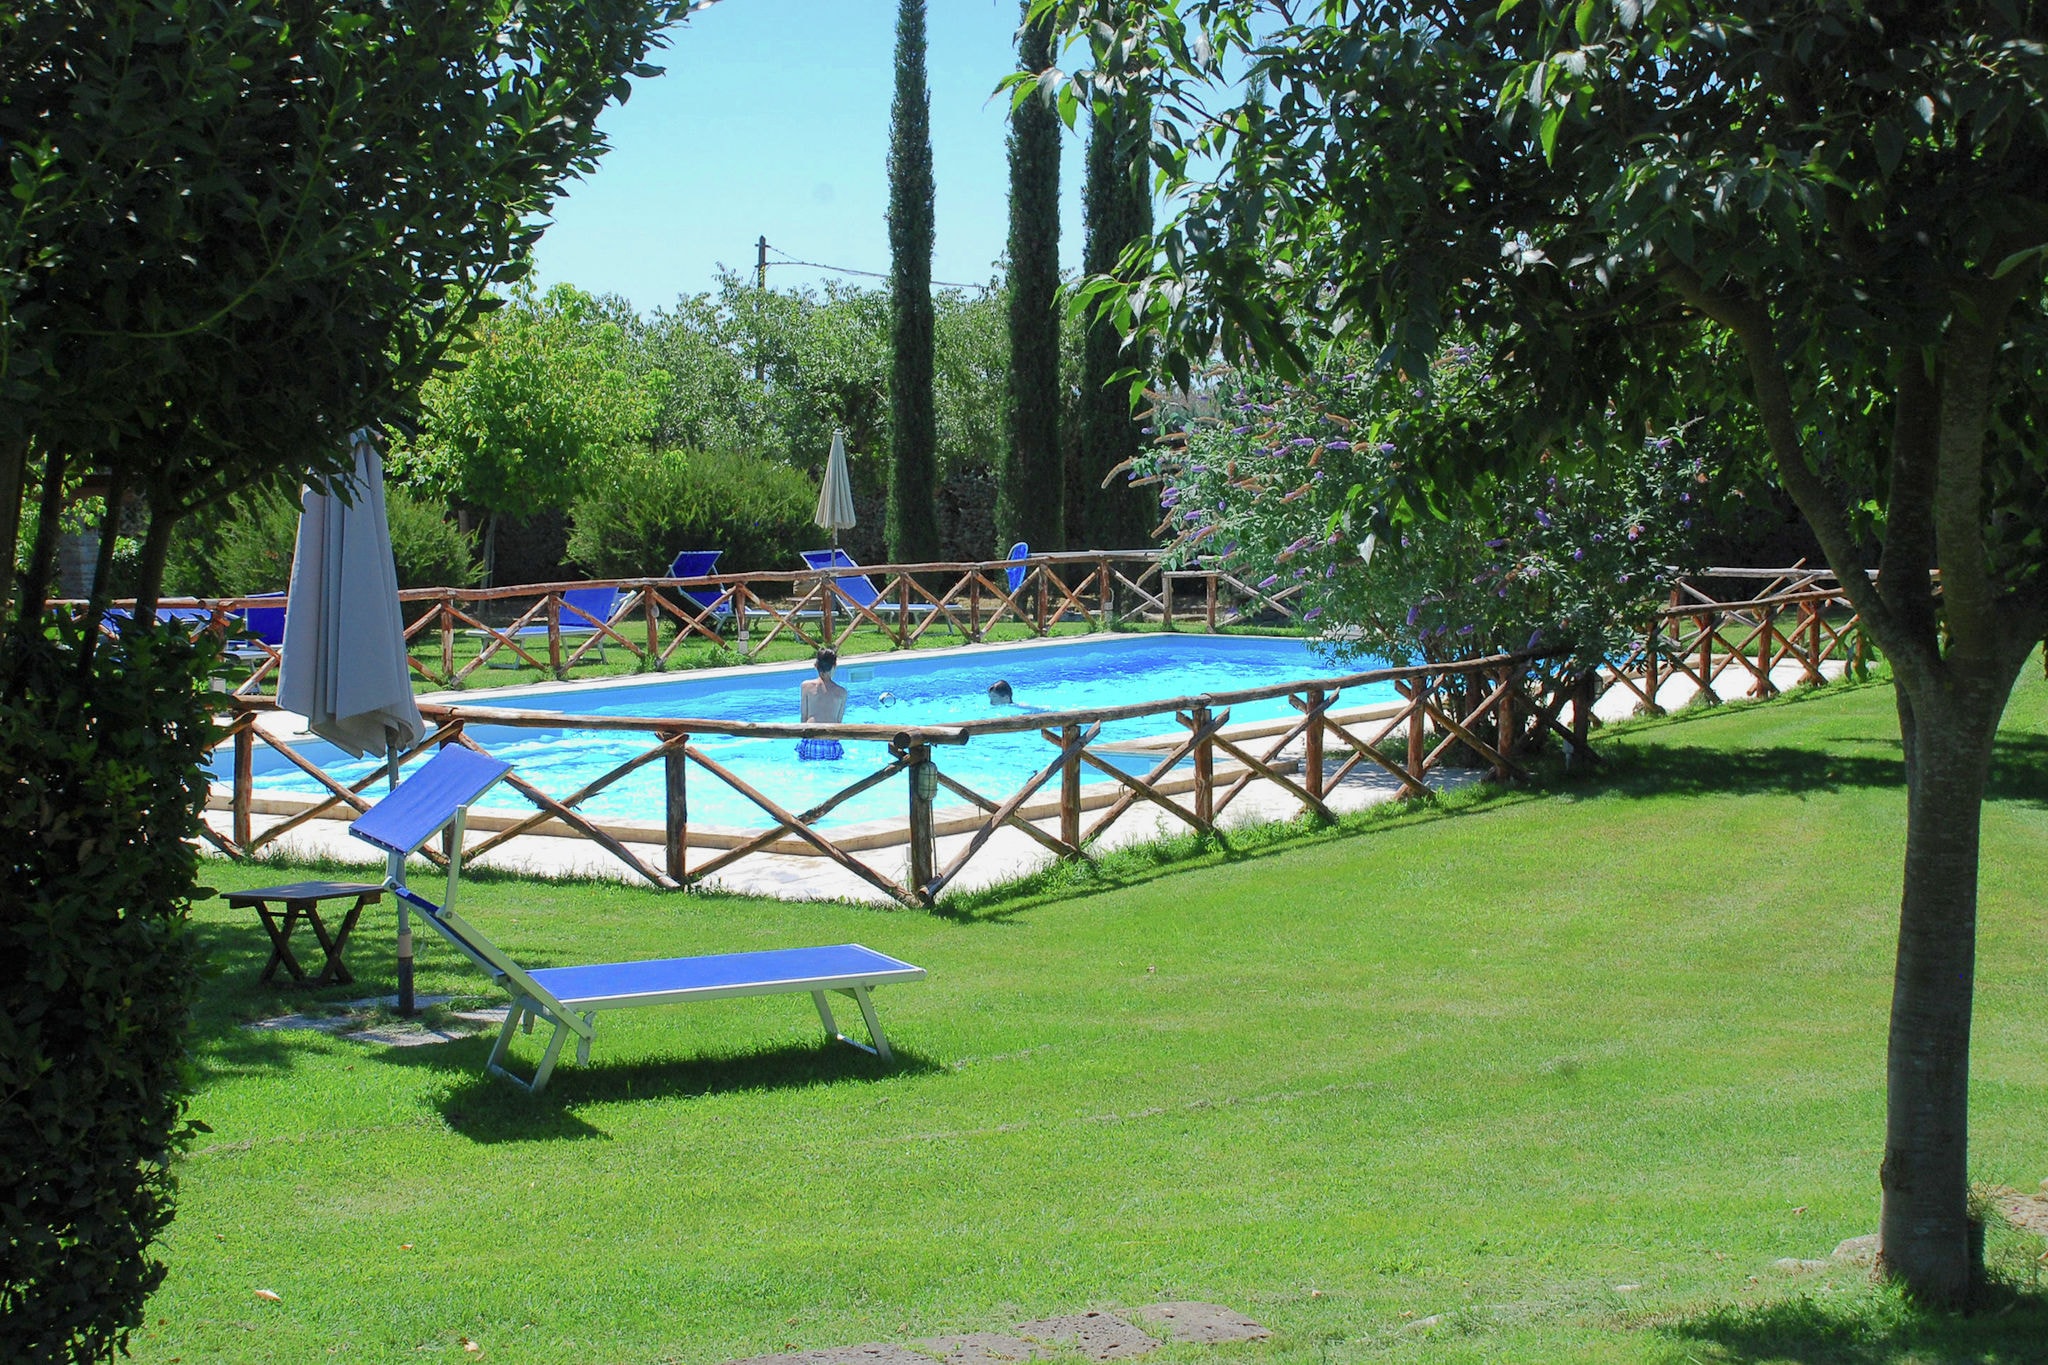 Agriturismo with swimming pool, in the hills between vineyards, olive groves and forests